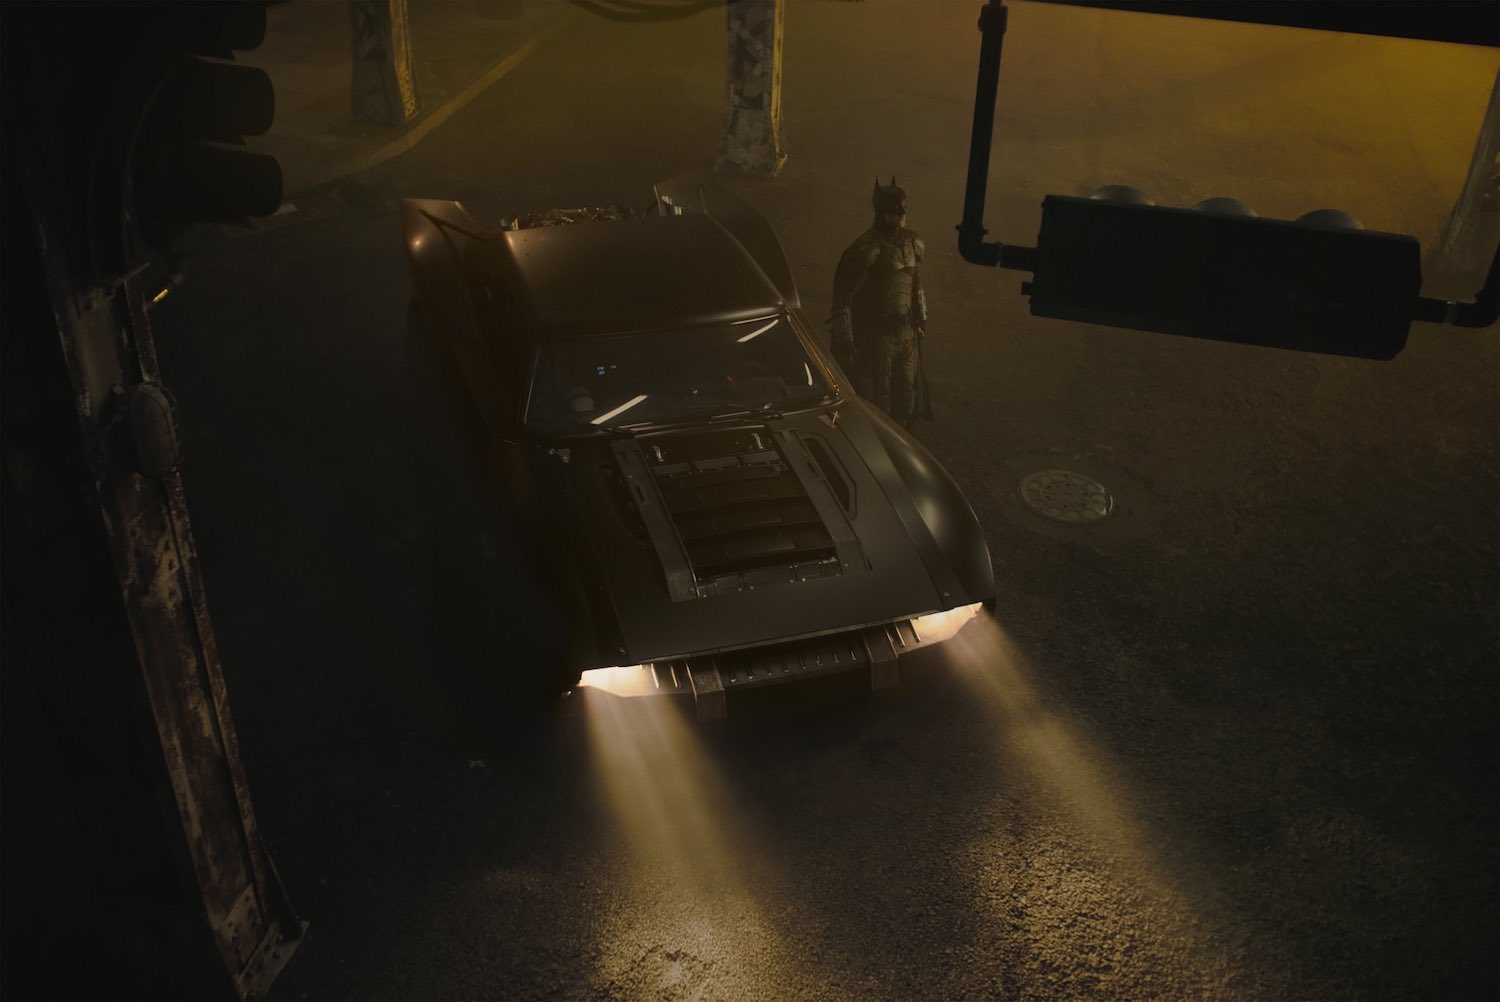 Batman standing next to a highly modified 1968-70 Dodge Charger muscle car: the new batmobile